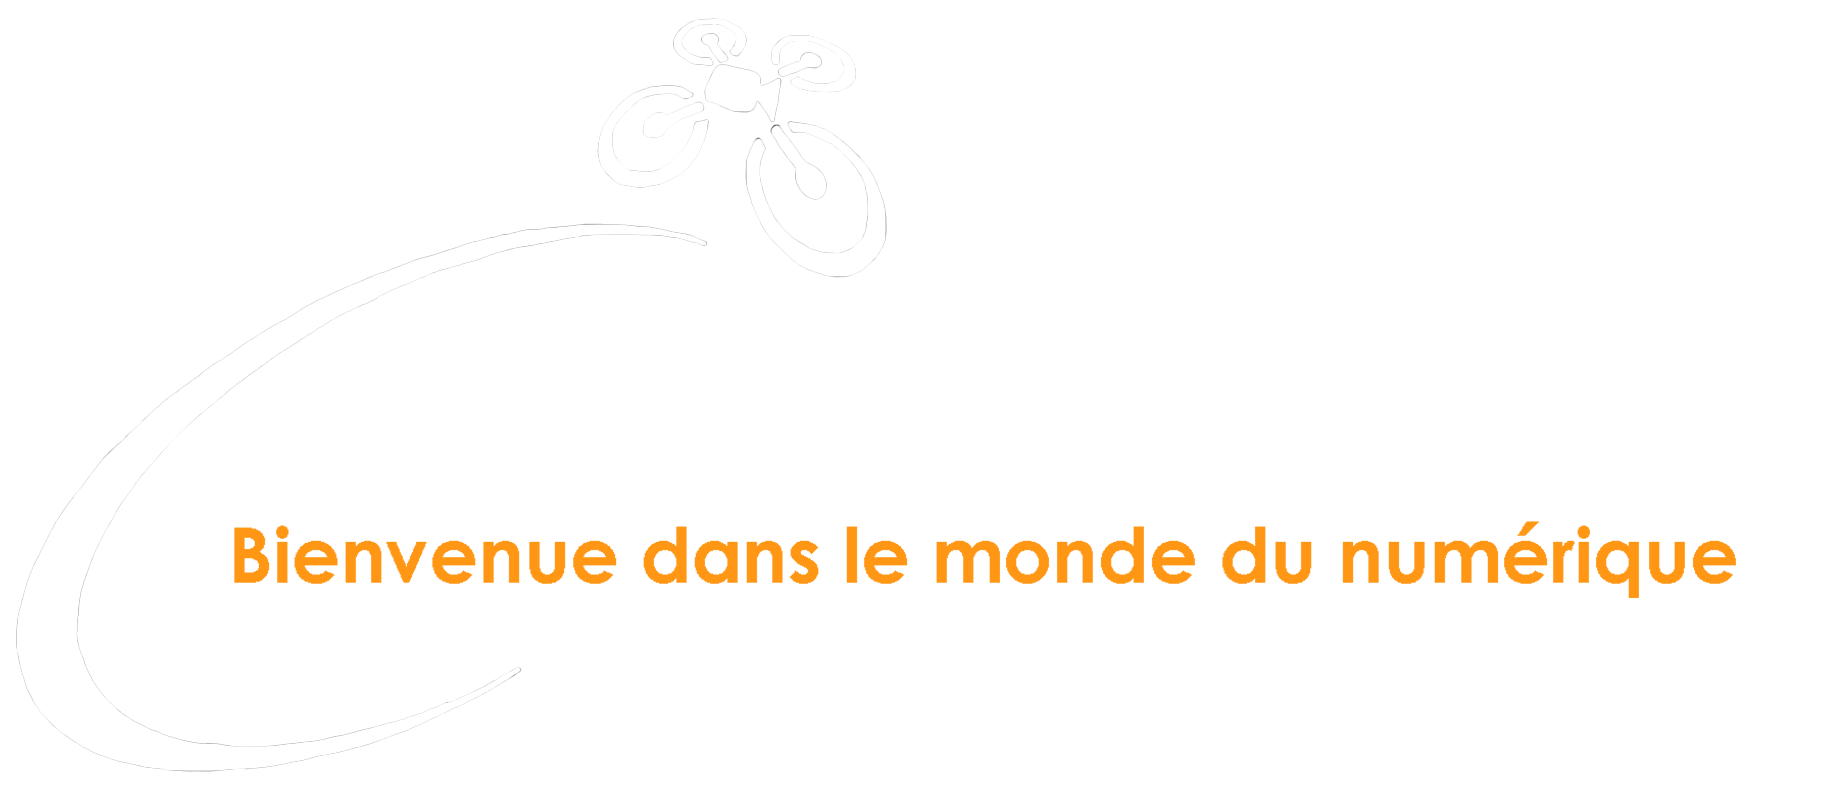 www.streaming-live.me